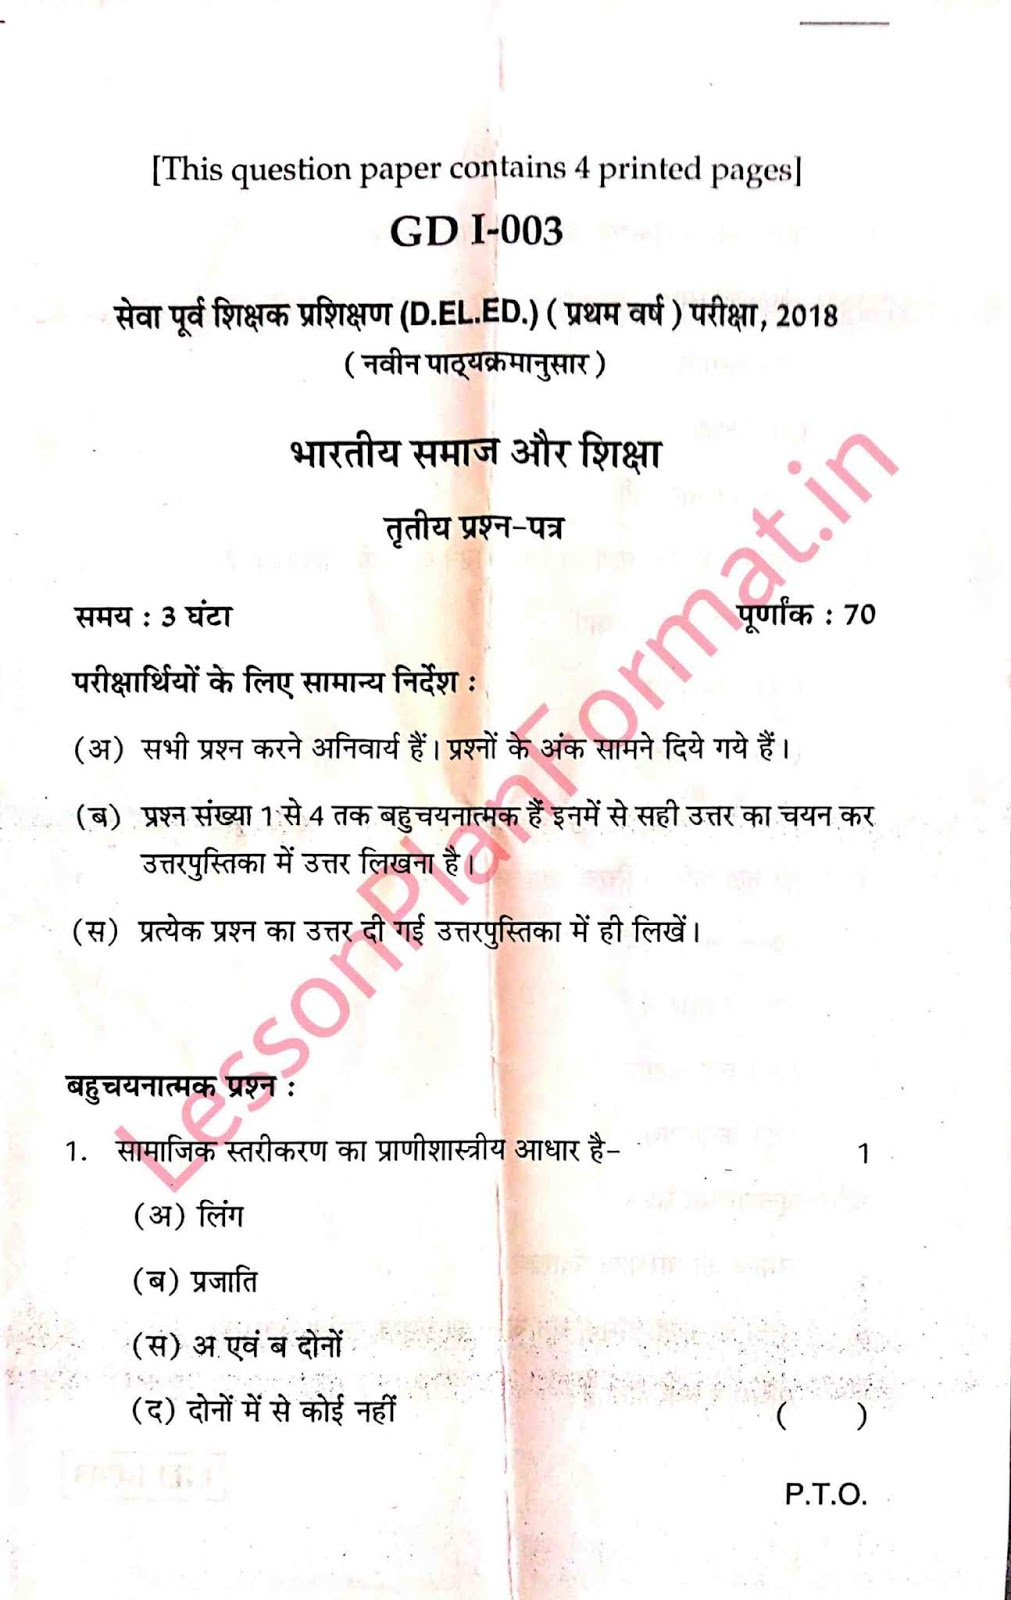 Deled First Year 3rd old question paper 2018